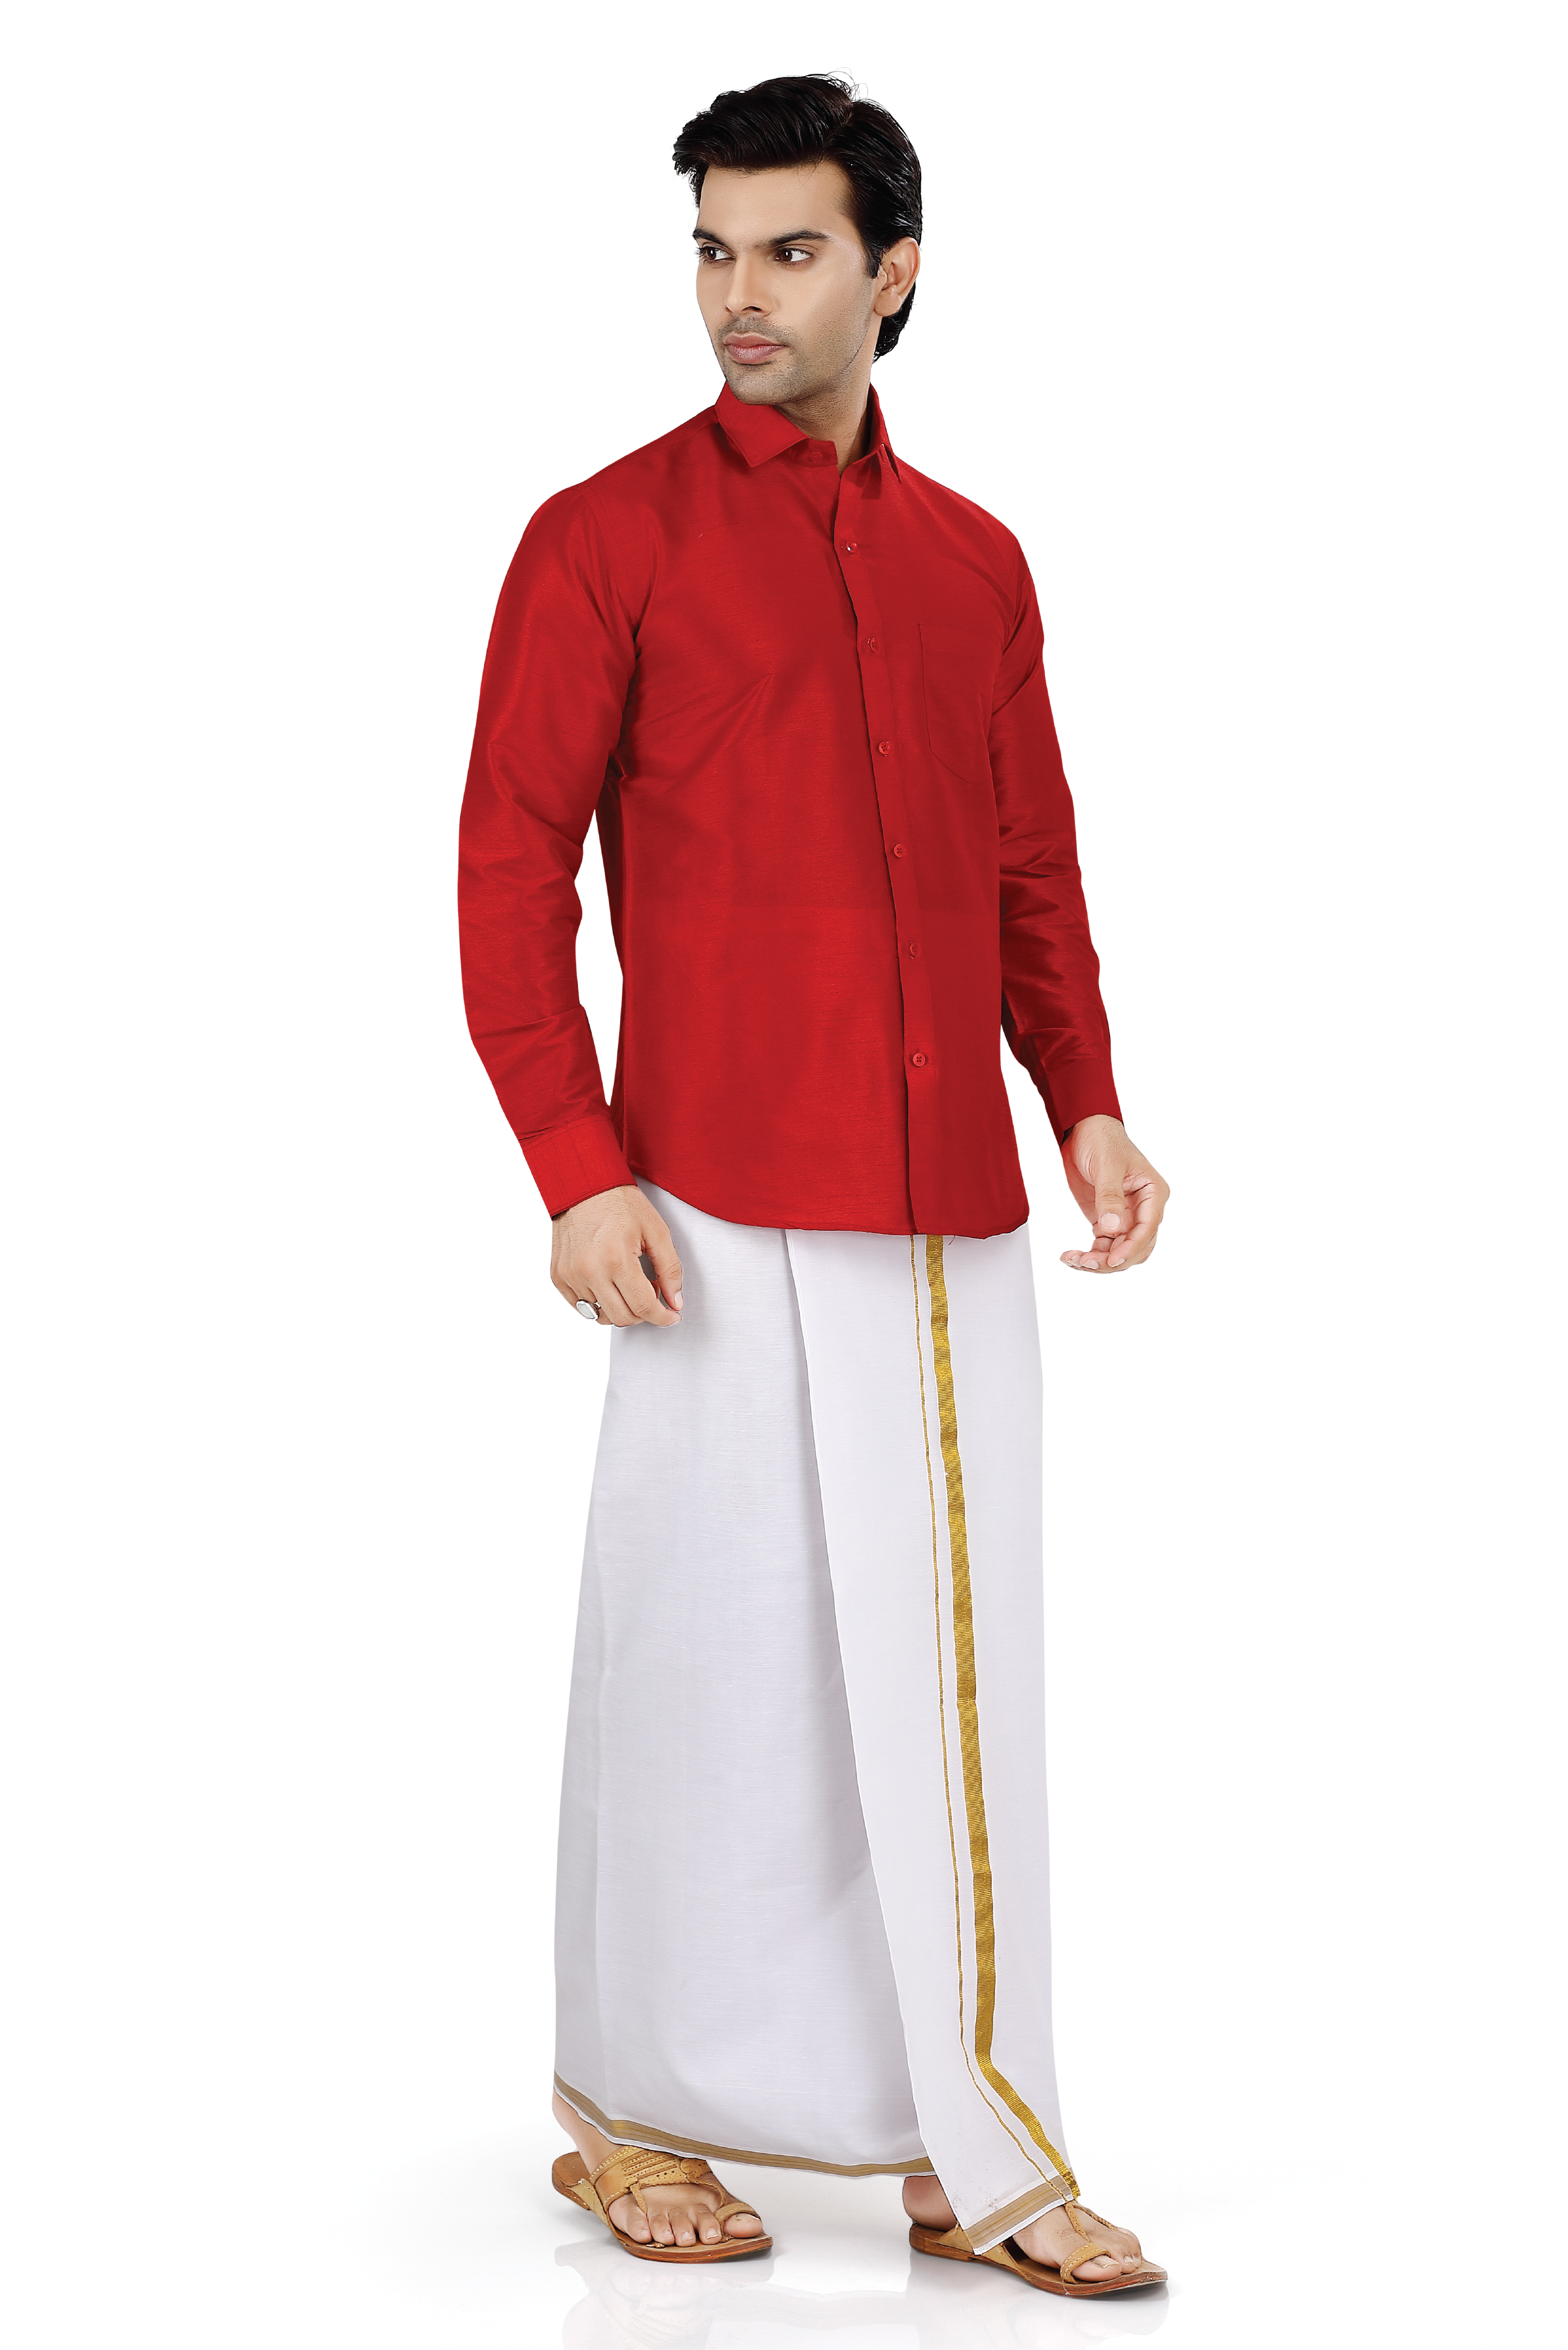 Dupion Silk Shirt in Red Full sleeves with Cotton Dhoti - Premium Dhoti Kurta from Dapper Ethnic - Just $95! Shop now at Dulhan Exclusives